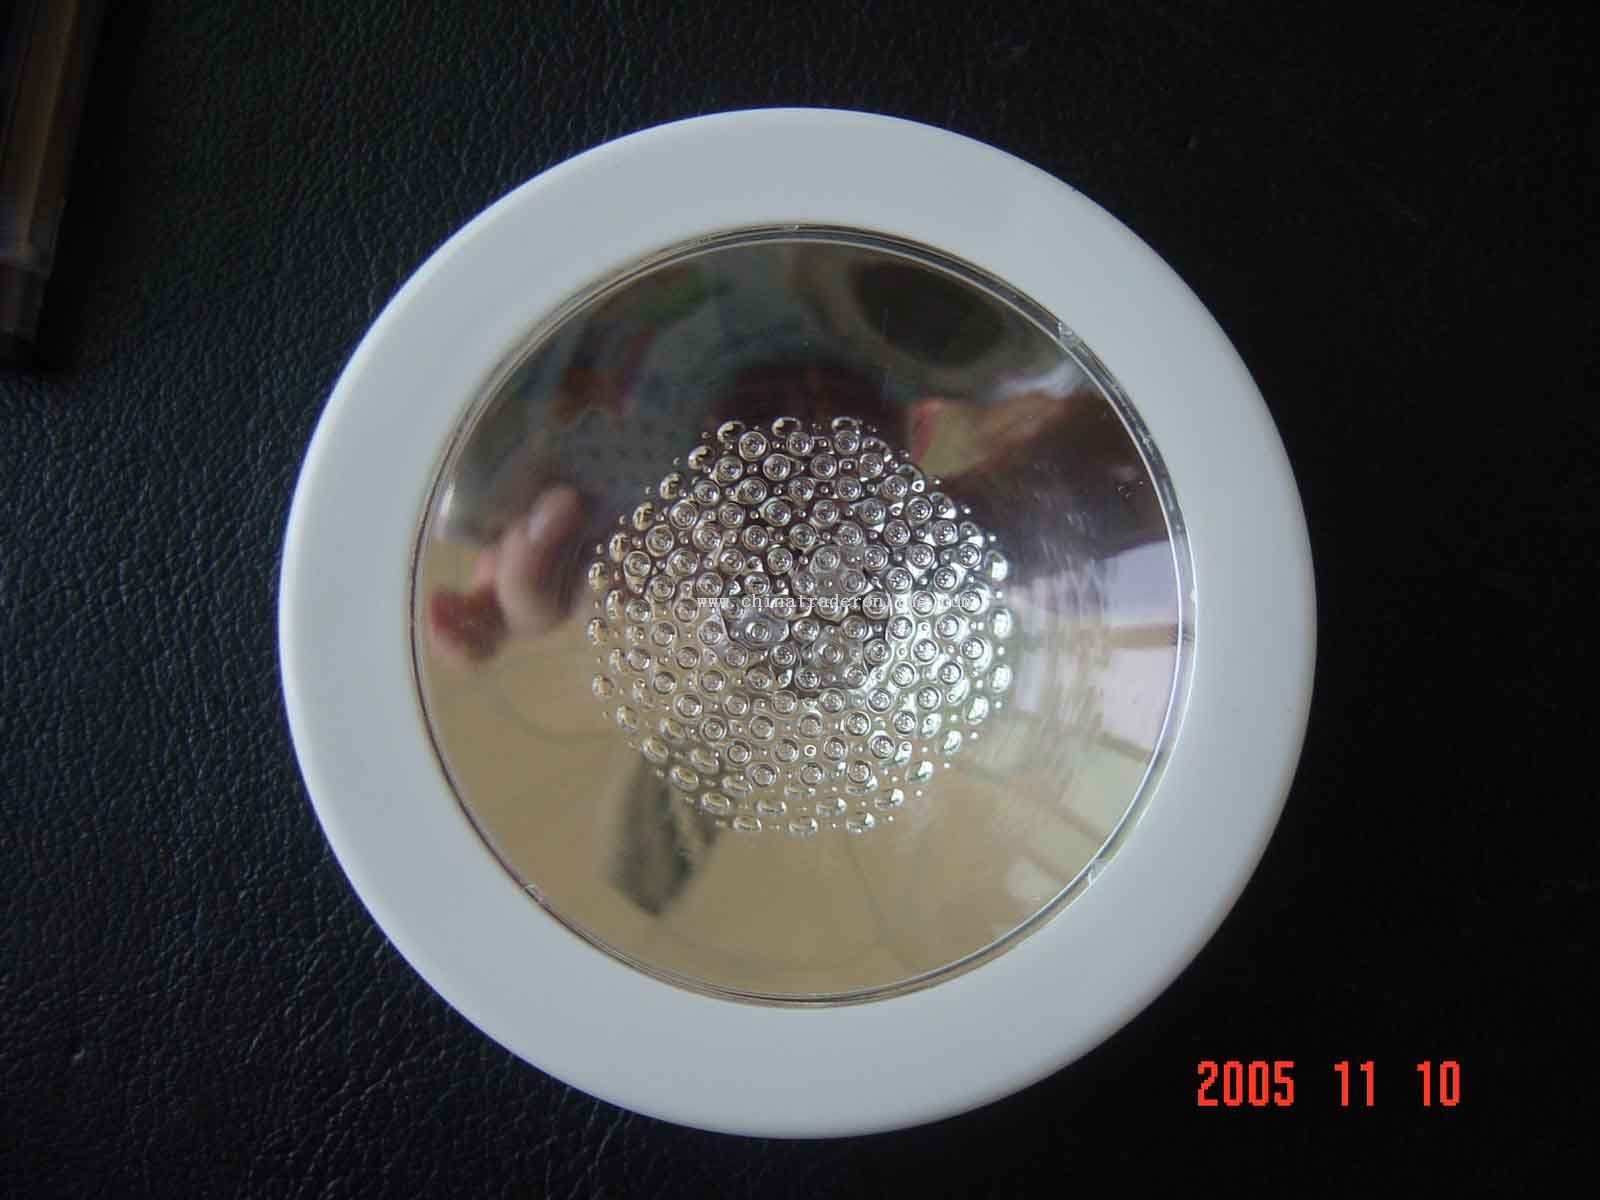 Lighting cup coaster from China